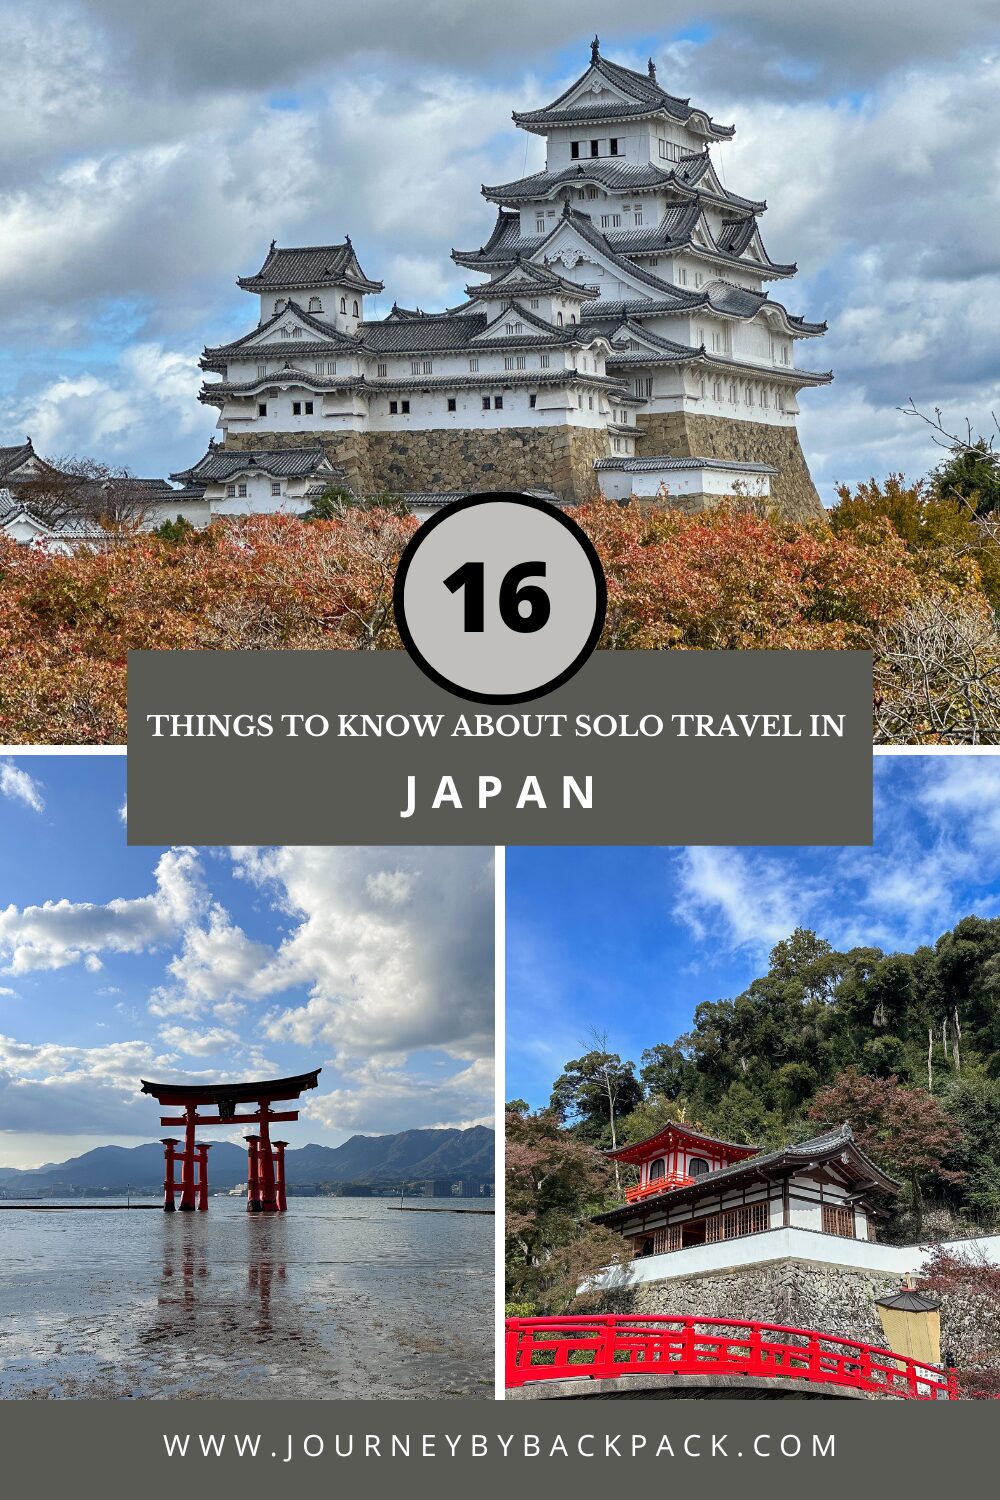 Solo travel in Japan